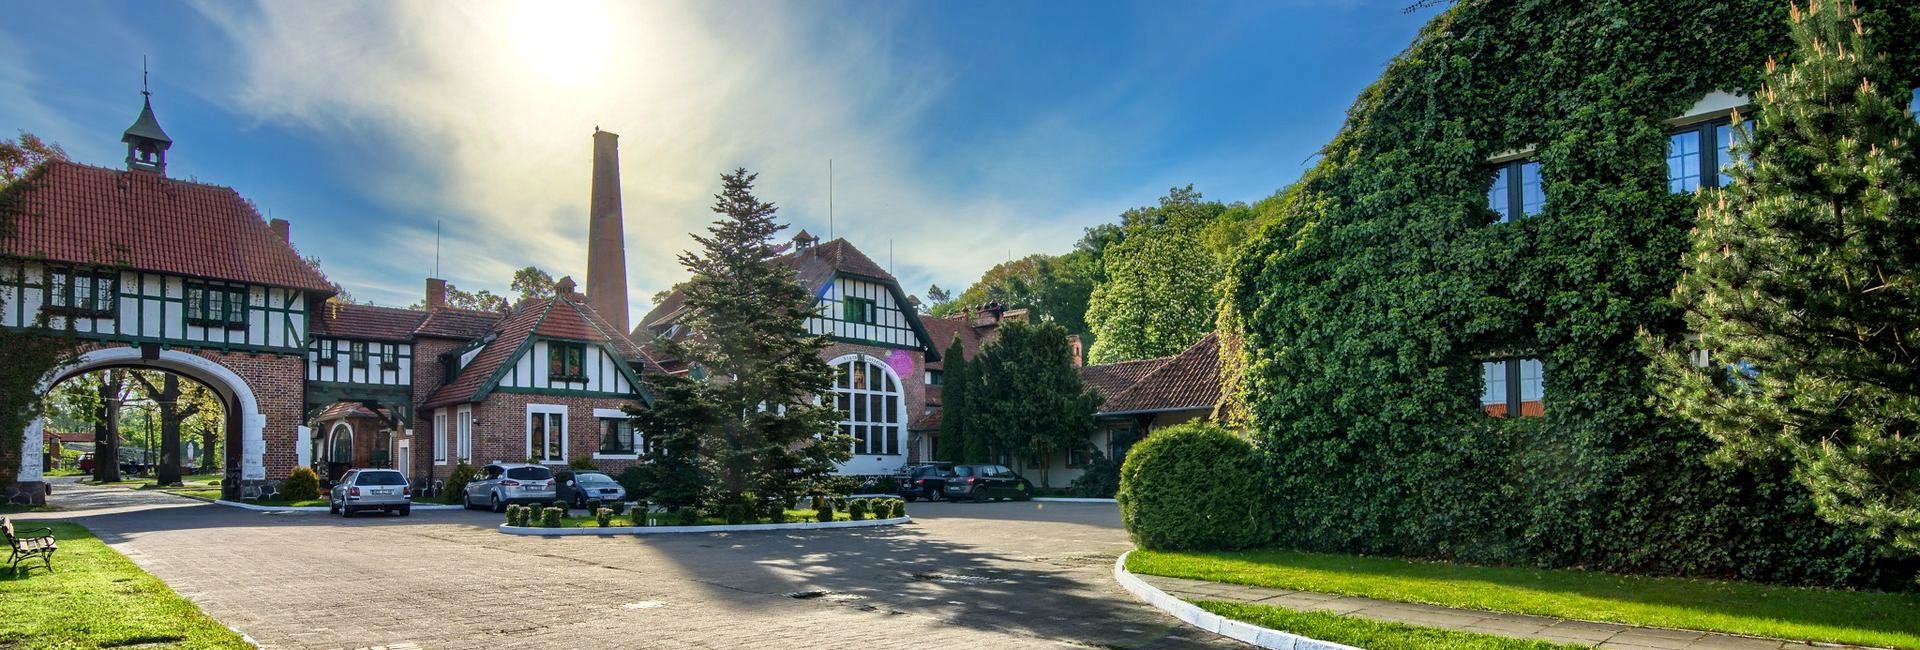 Front picture of Kadyny Folwark Hotel & Spa in Tolkmicko, Poland